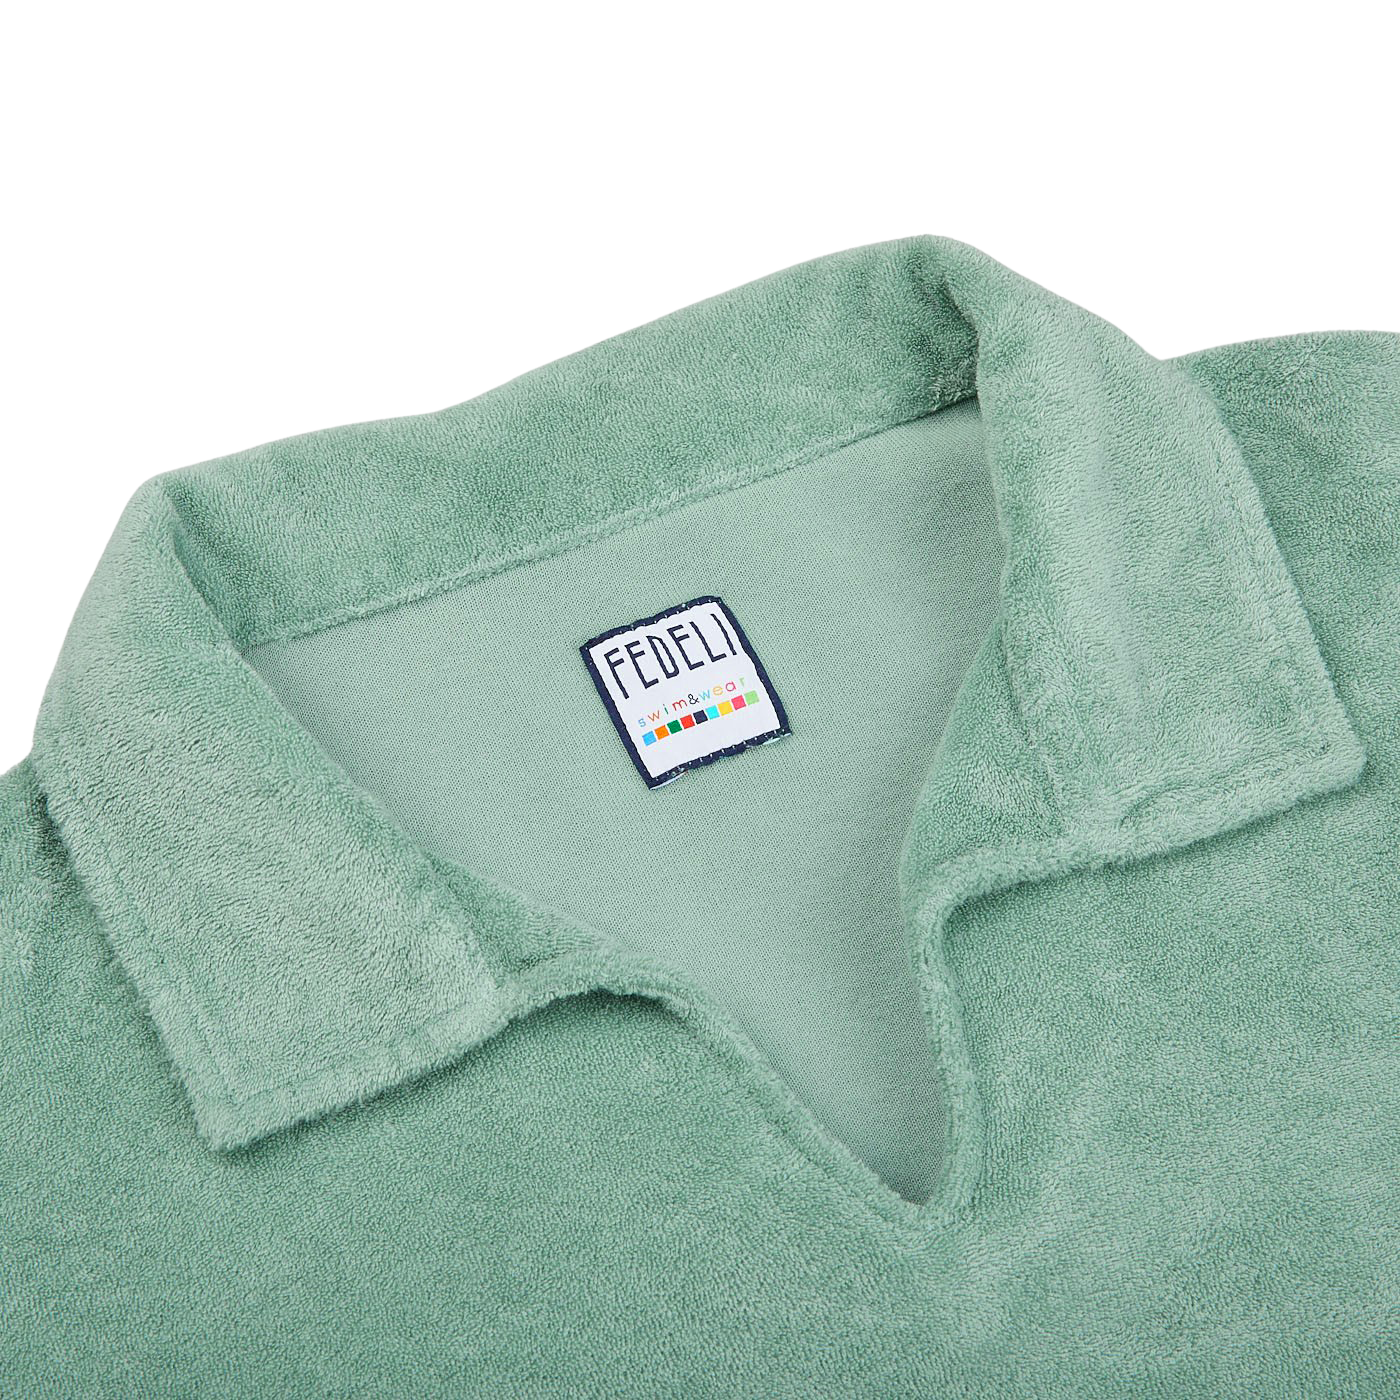 A long-sleeve flannel shirt in a favorite shade of green, with a Fedeli label on the collar.